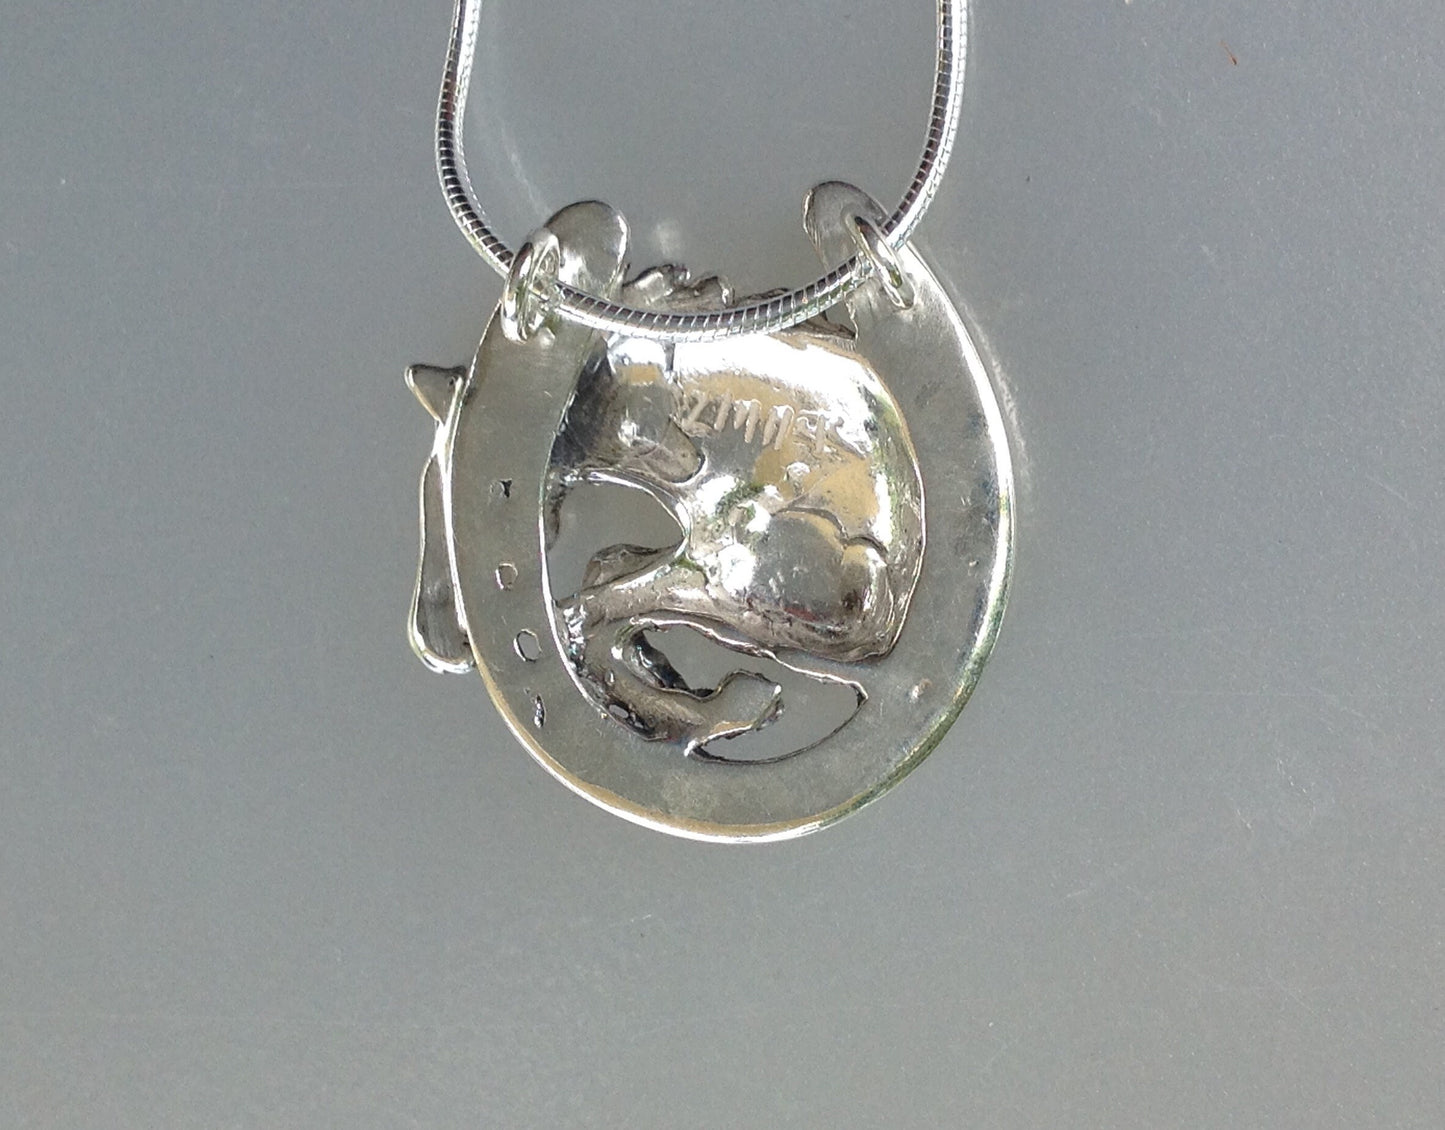 Jumper horse in horseshoe  pendant and chain.  Stone set eye. Sterling Silver Forge Hill Sculpture horse jewelry Zimmer